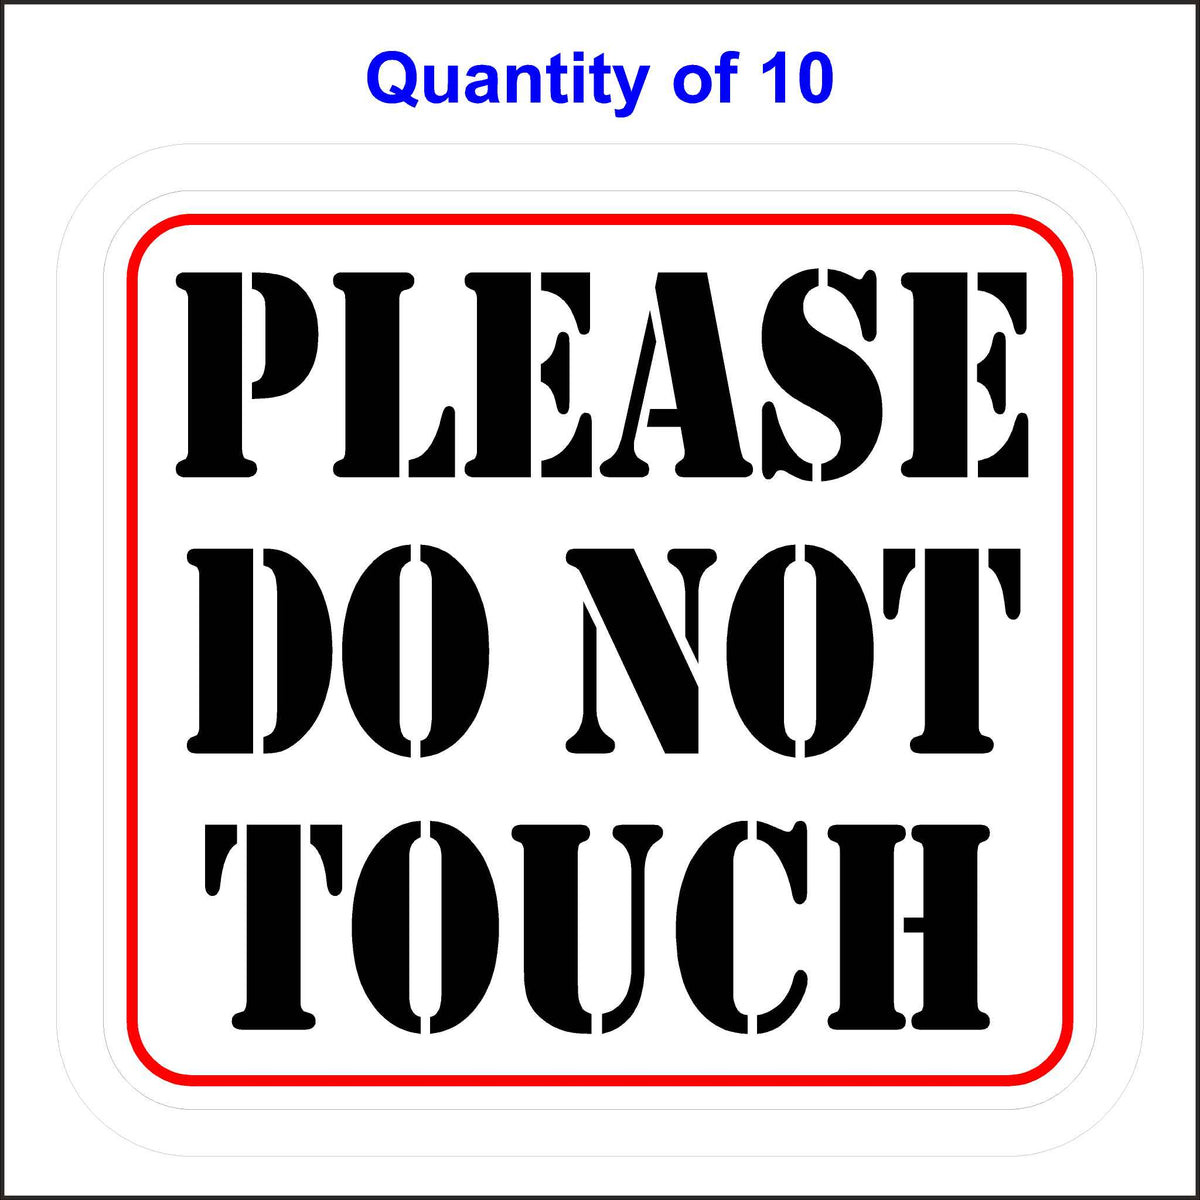 Please Do Not Touch Sticker With A White Background, Black Letters and Red Outline. 10 Quantity.